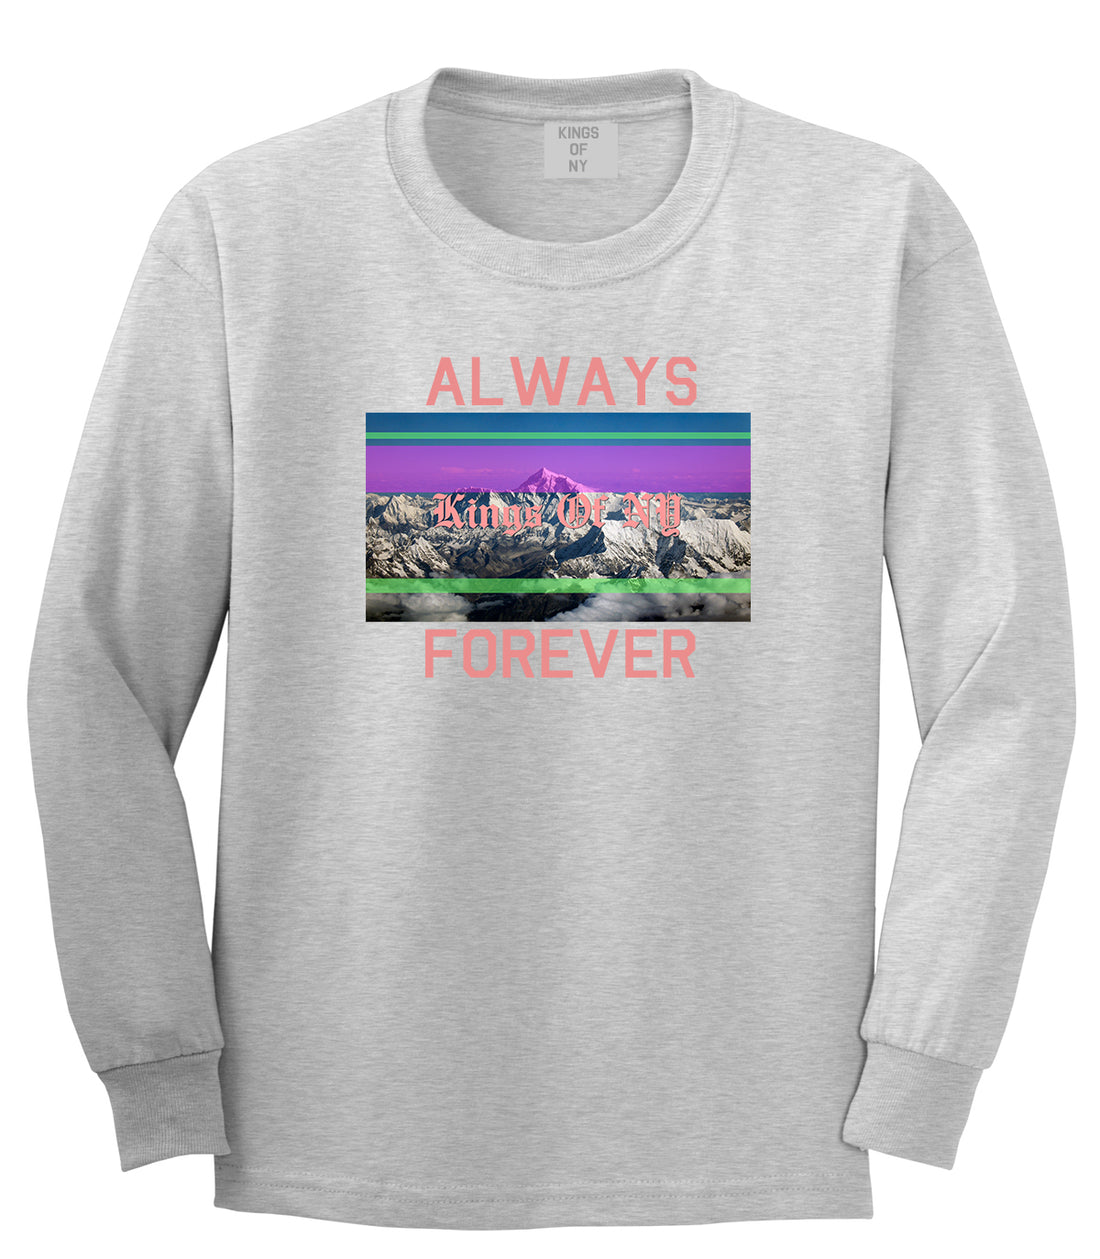 Mountains Always And Forever Mens Long Sleeve T-Shirt Grey by Kings Of NY